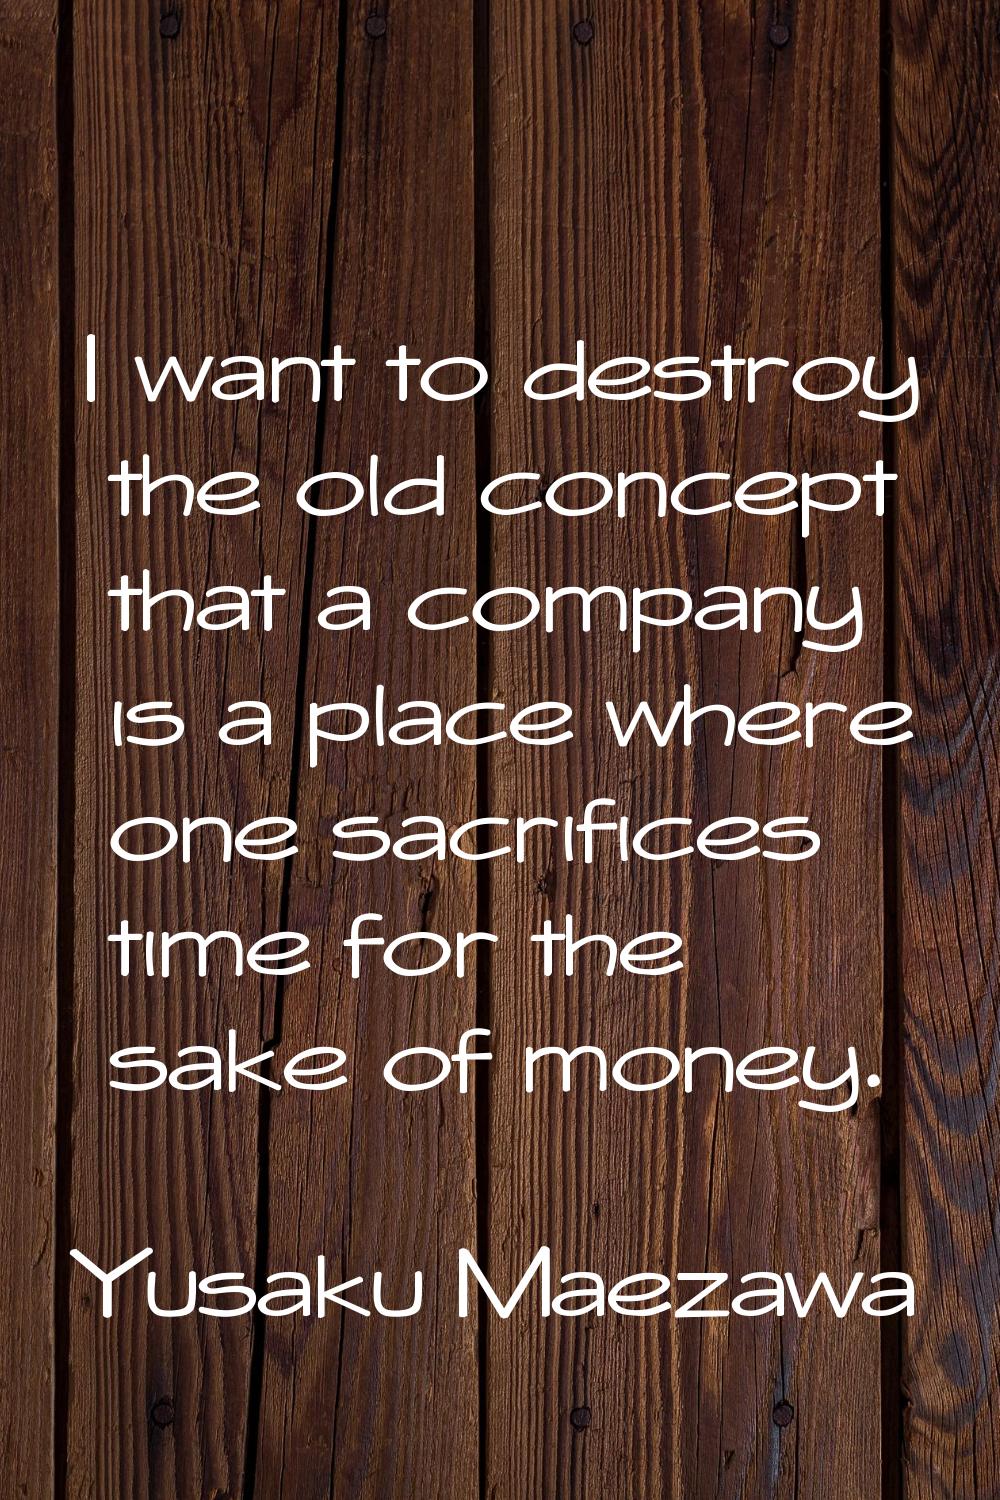 I want to destroy the old concept that a company is a place where one sacrifices time for the sake 